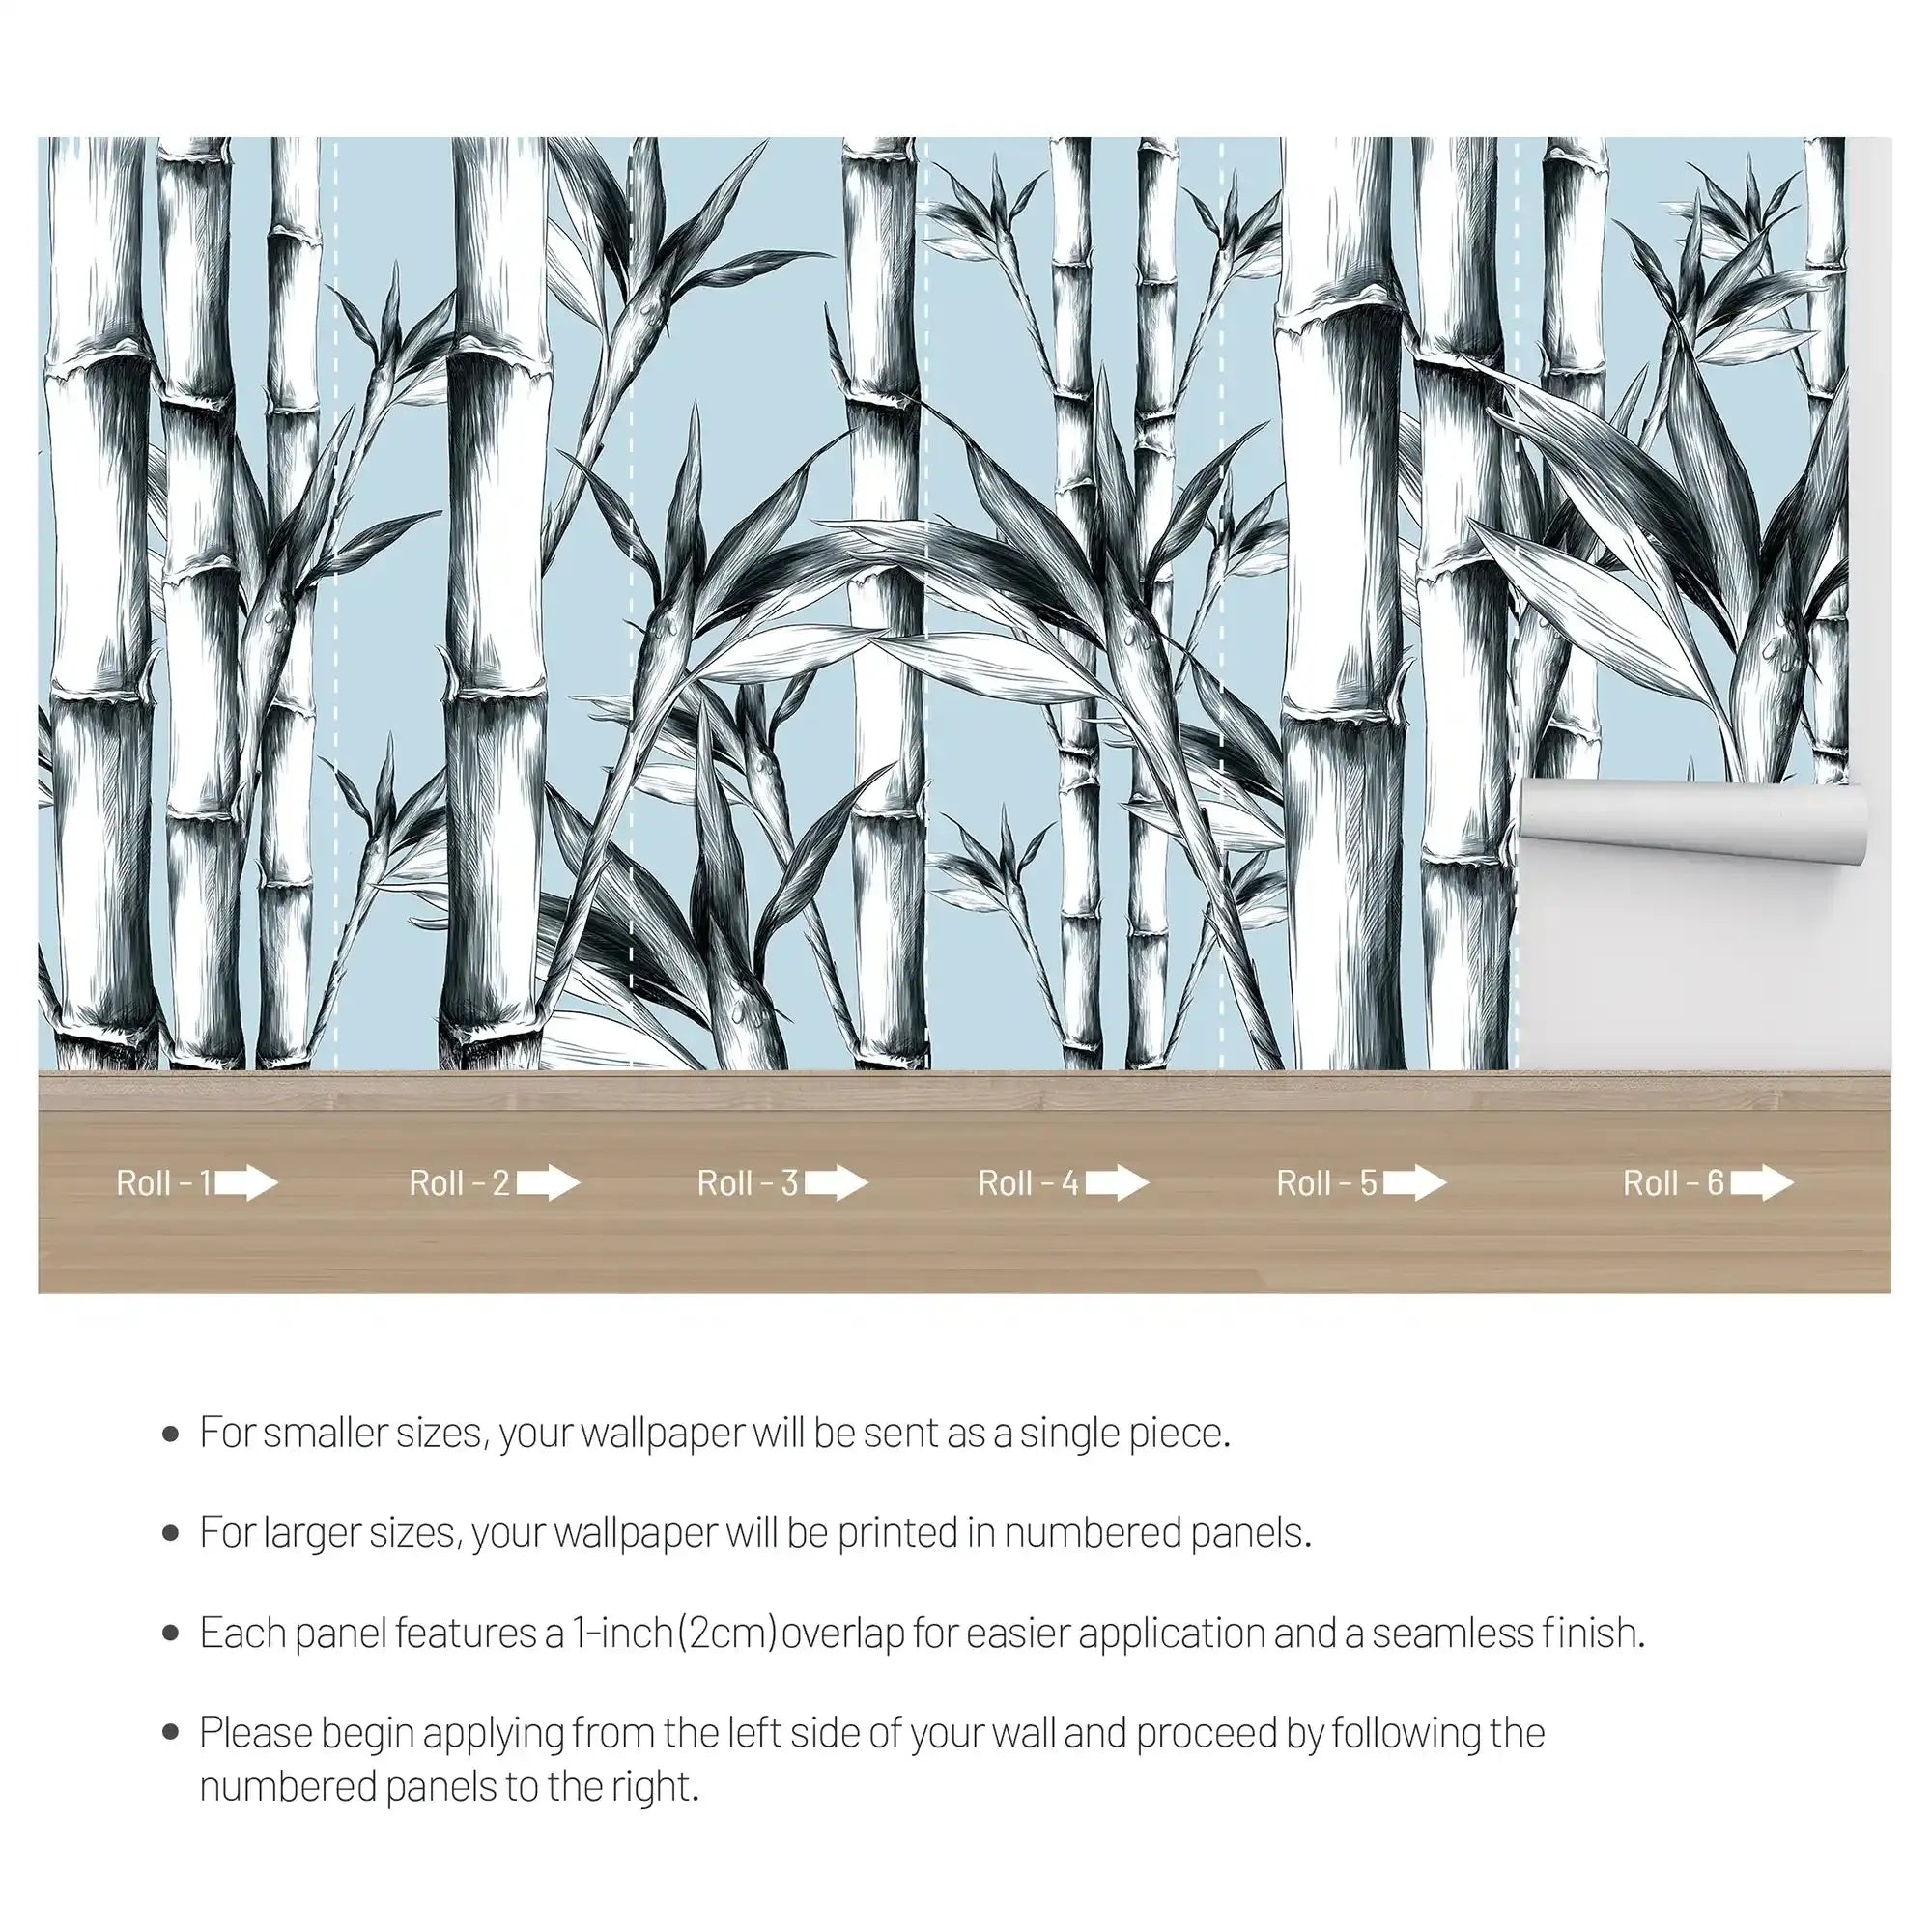 3098-B / Peel and Stick Wallpaper: Modern Bamboo Pattern, Easy Install for Kitchen and Bathroom, Removable Wallpaper - Artevella